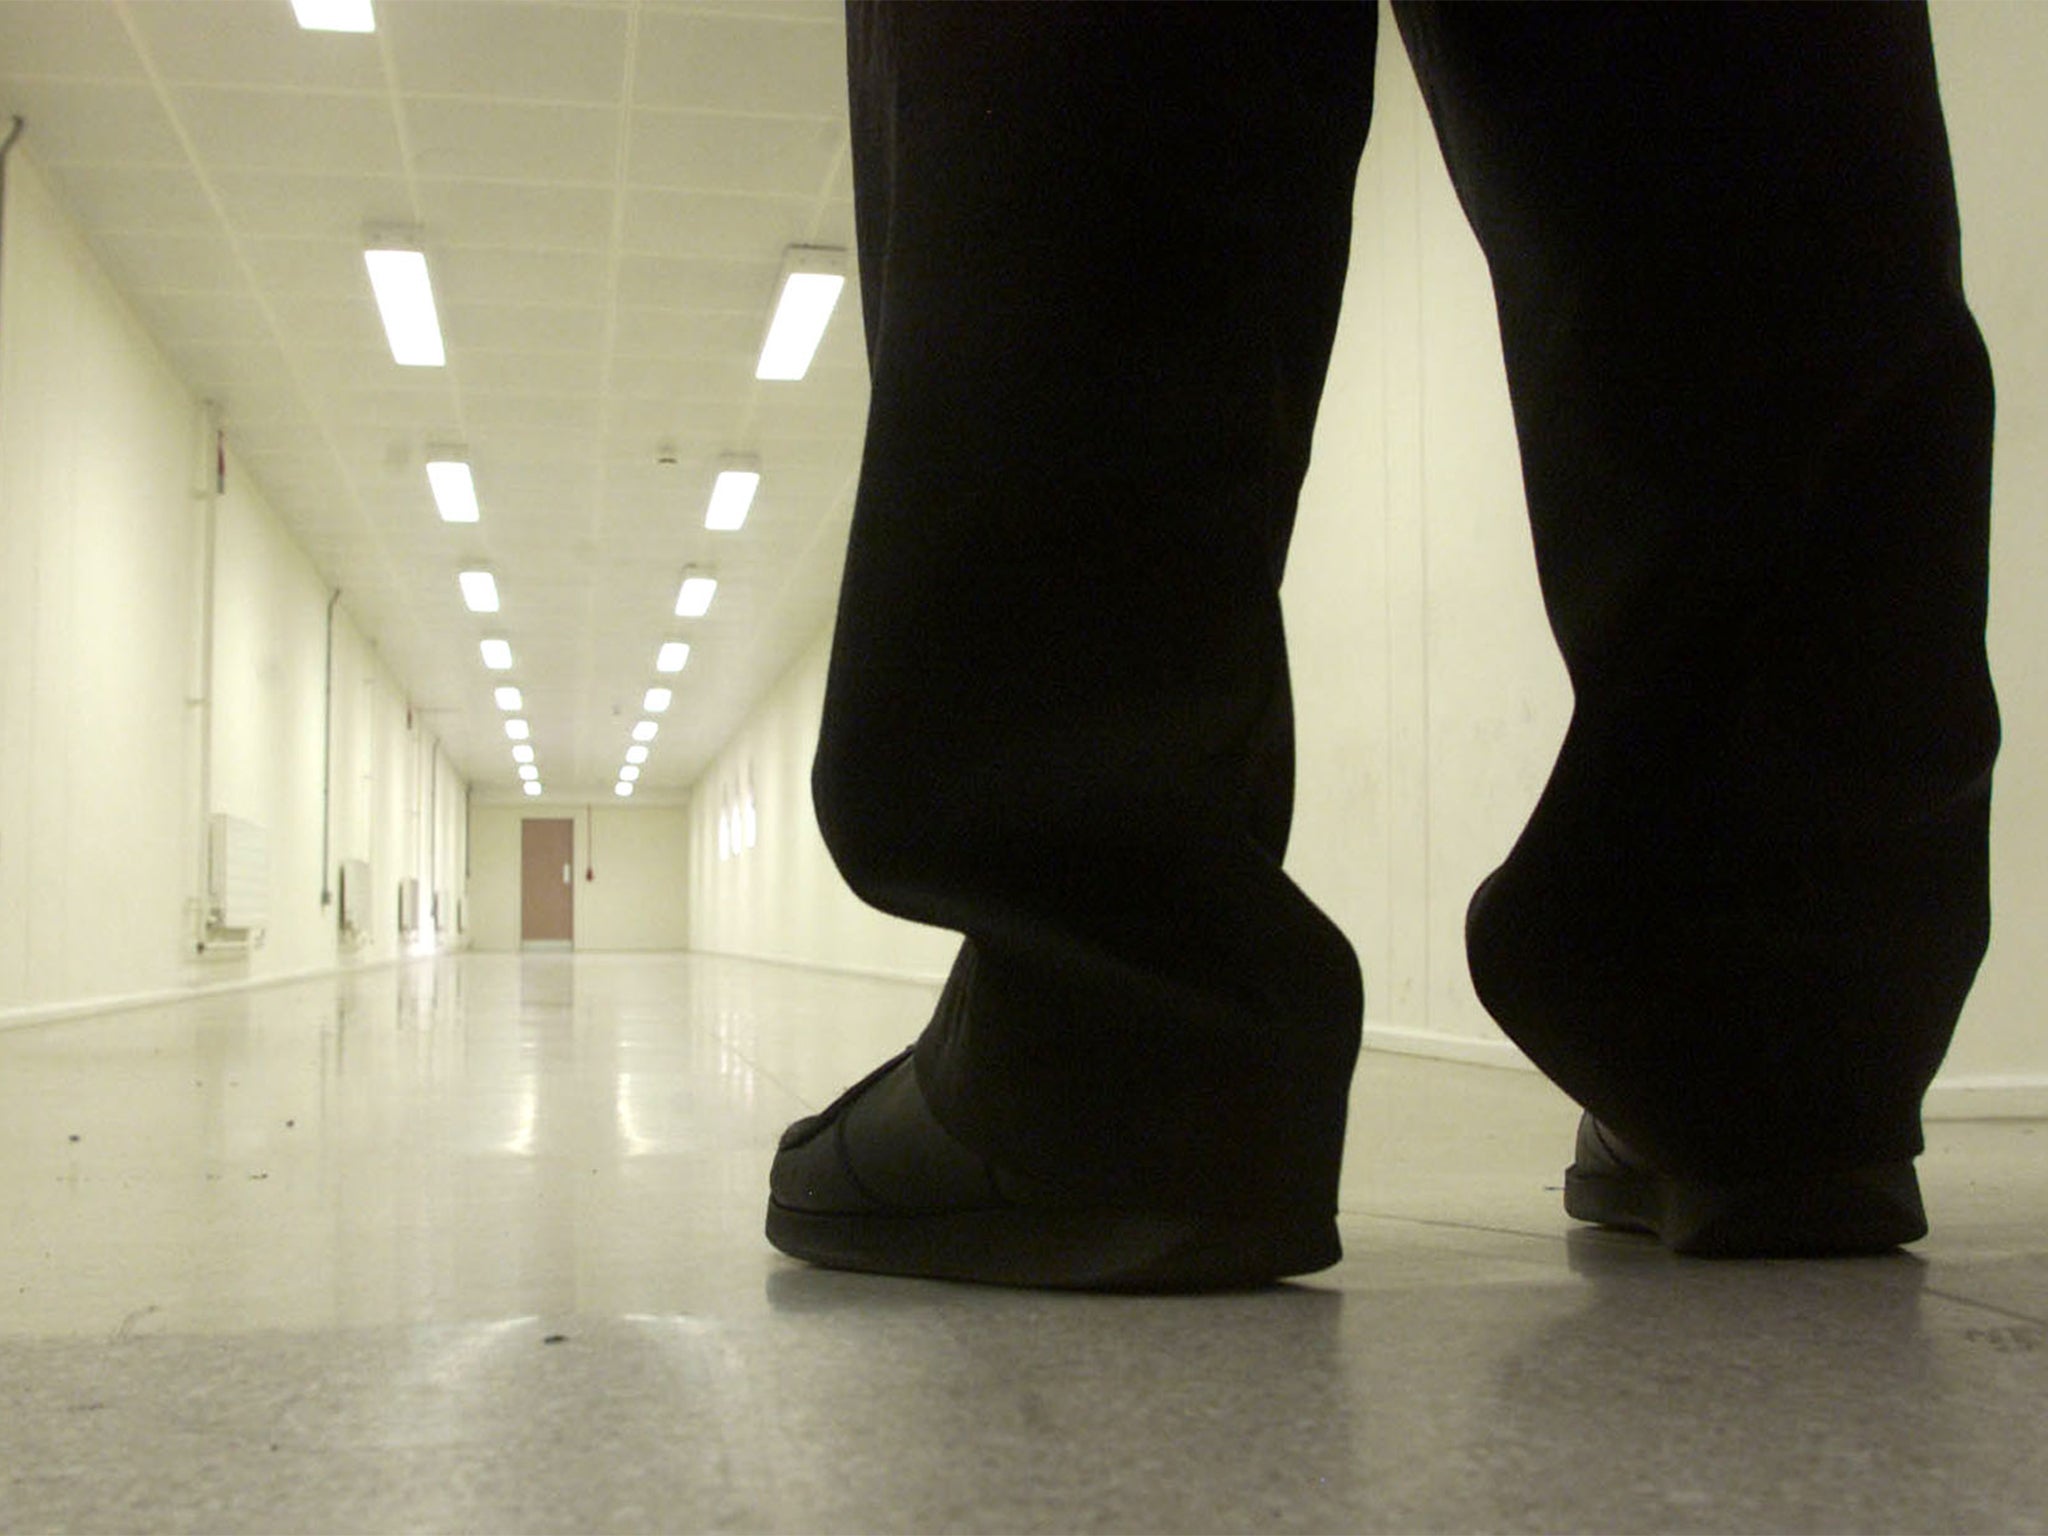 A security officer walks down one of the corridors of Yarl's Wood Immigration Removal Centre